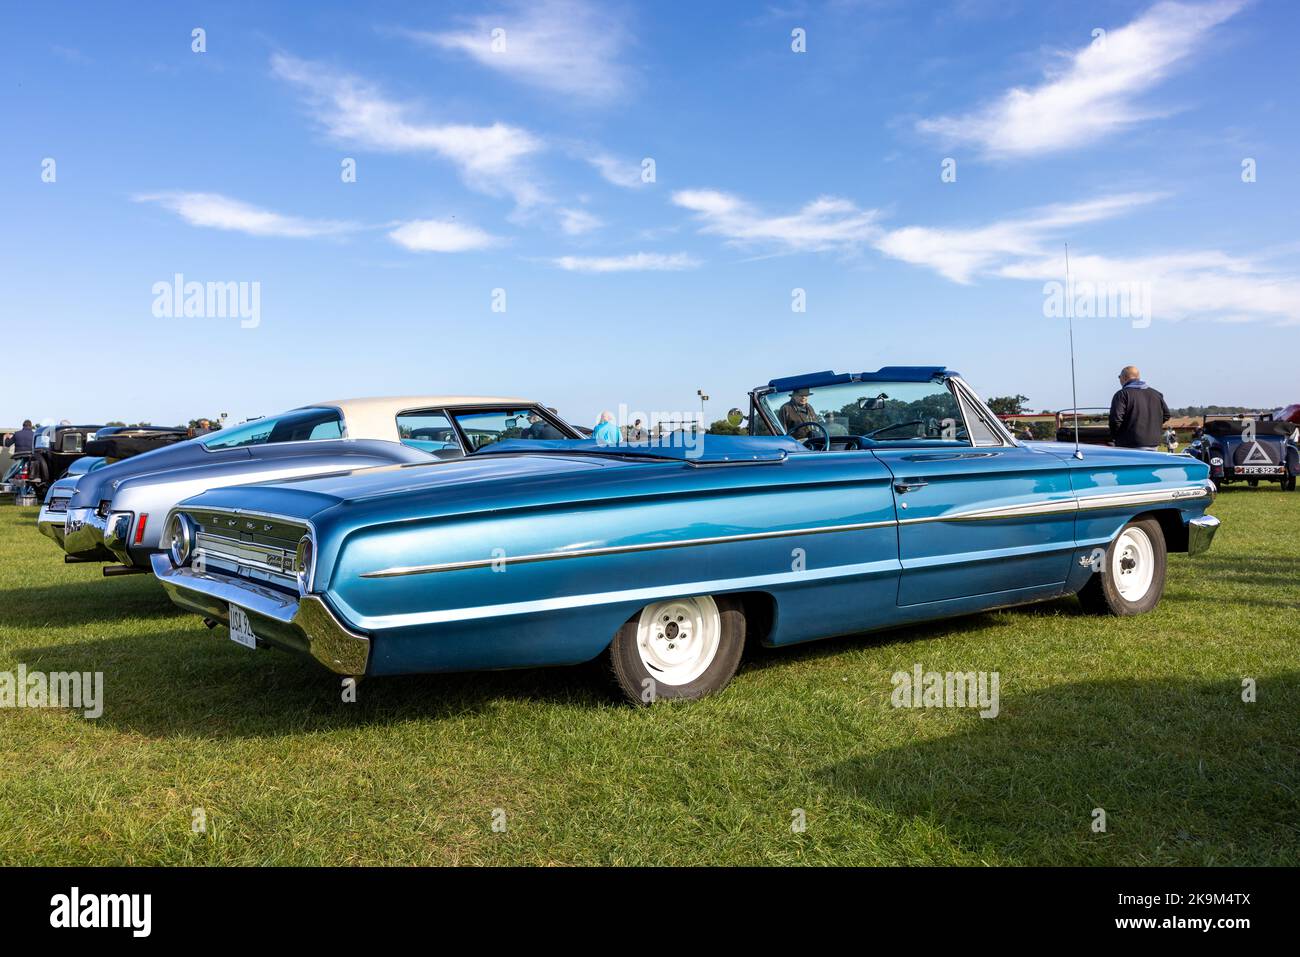 1964 Ford Galaxie 500, on display at the Race Day Airshow held at Shuttleworth on the 2nd October 2022 Stock Photo